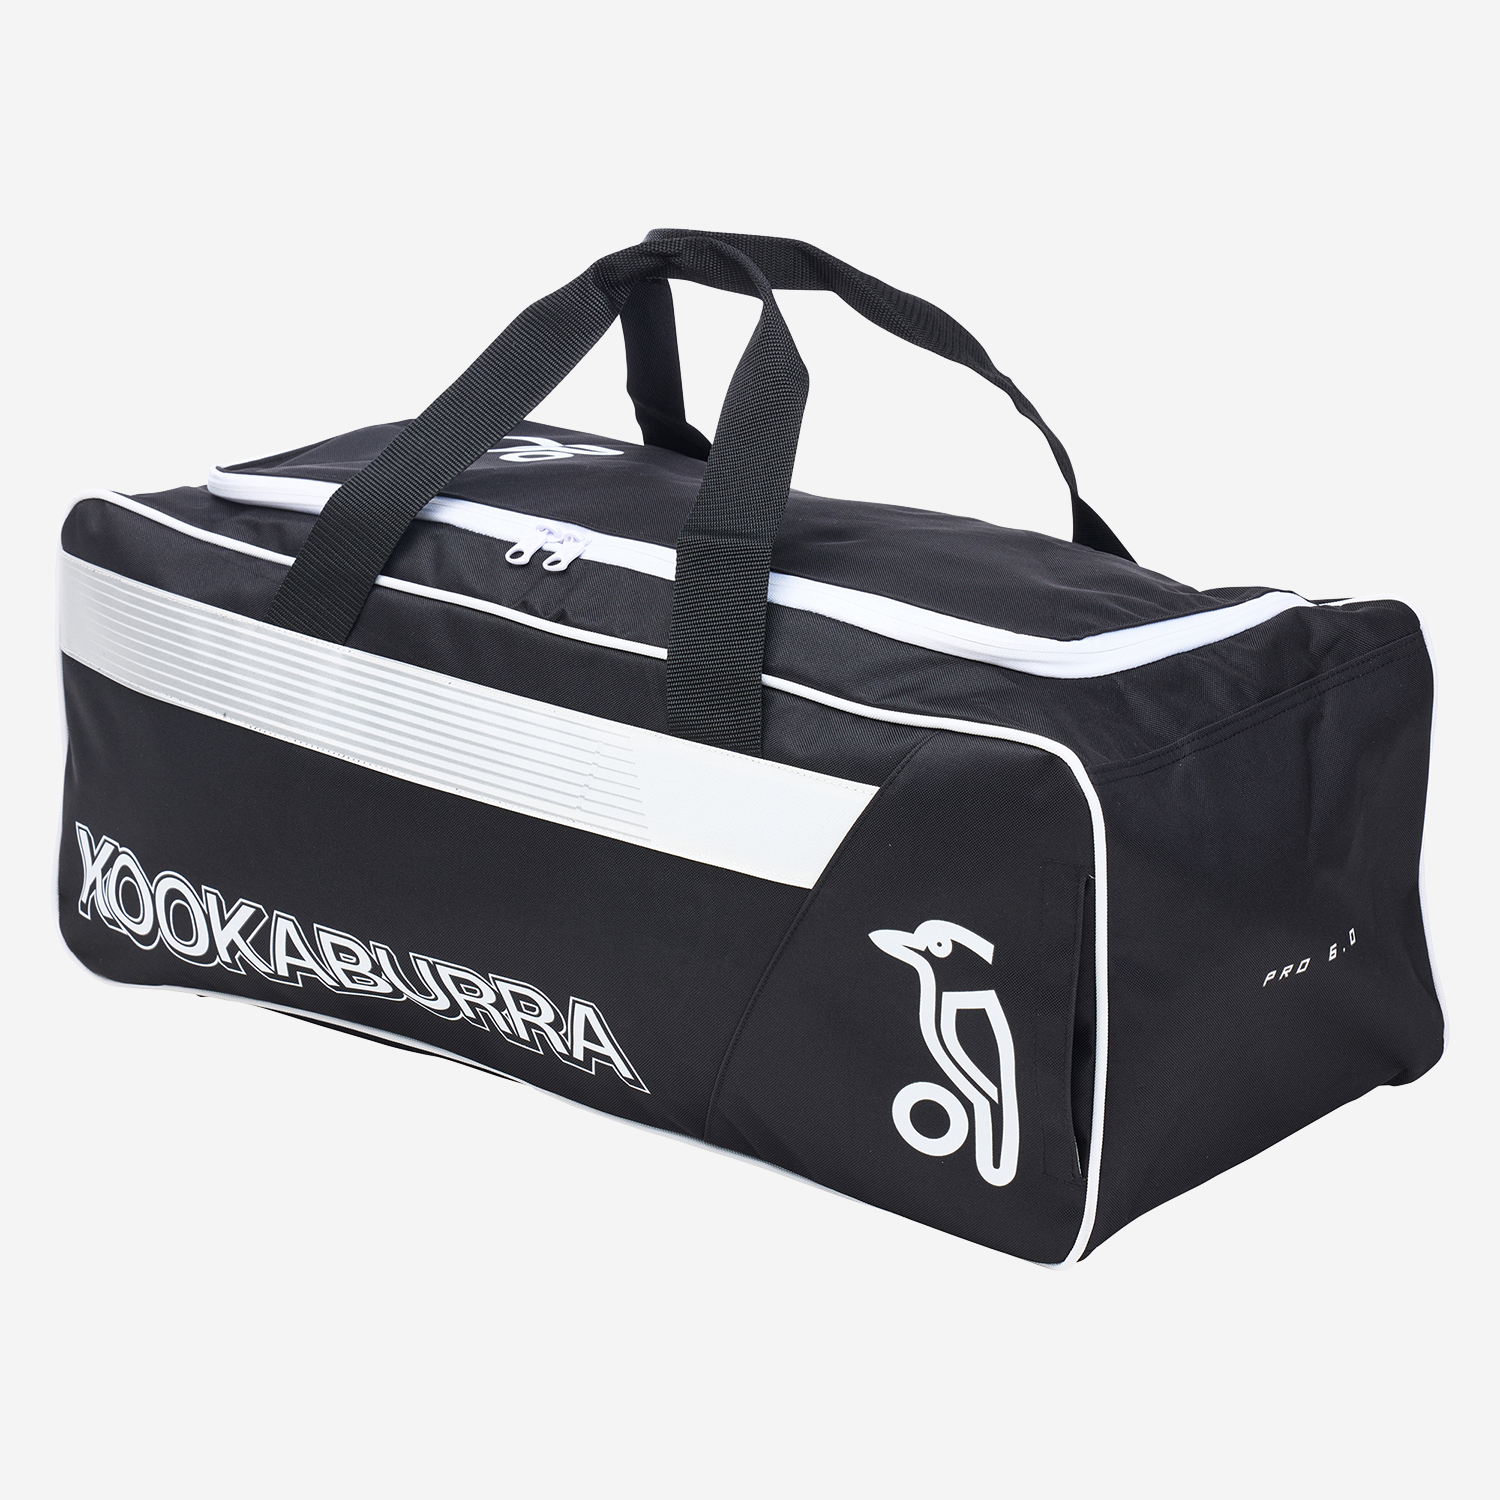 Pro 6.0 Holdall Cricket Bags